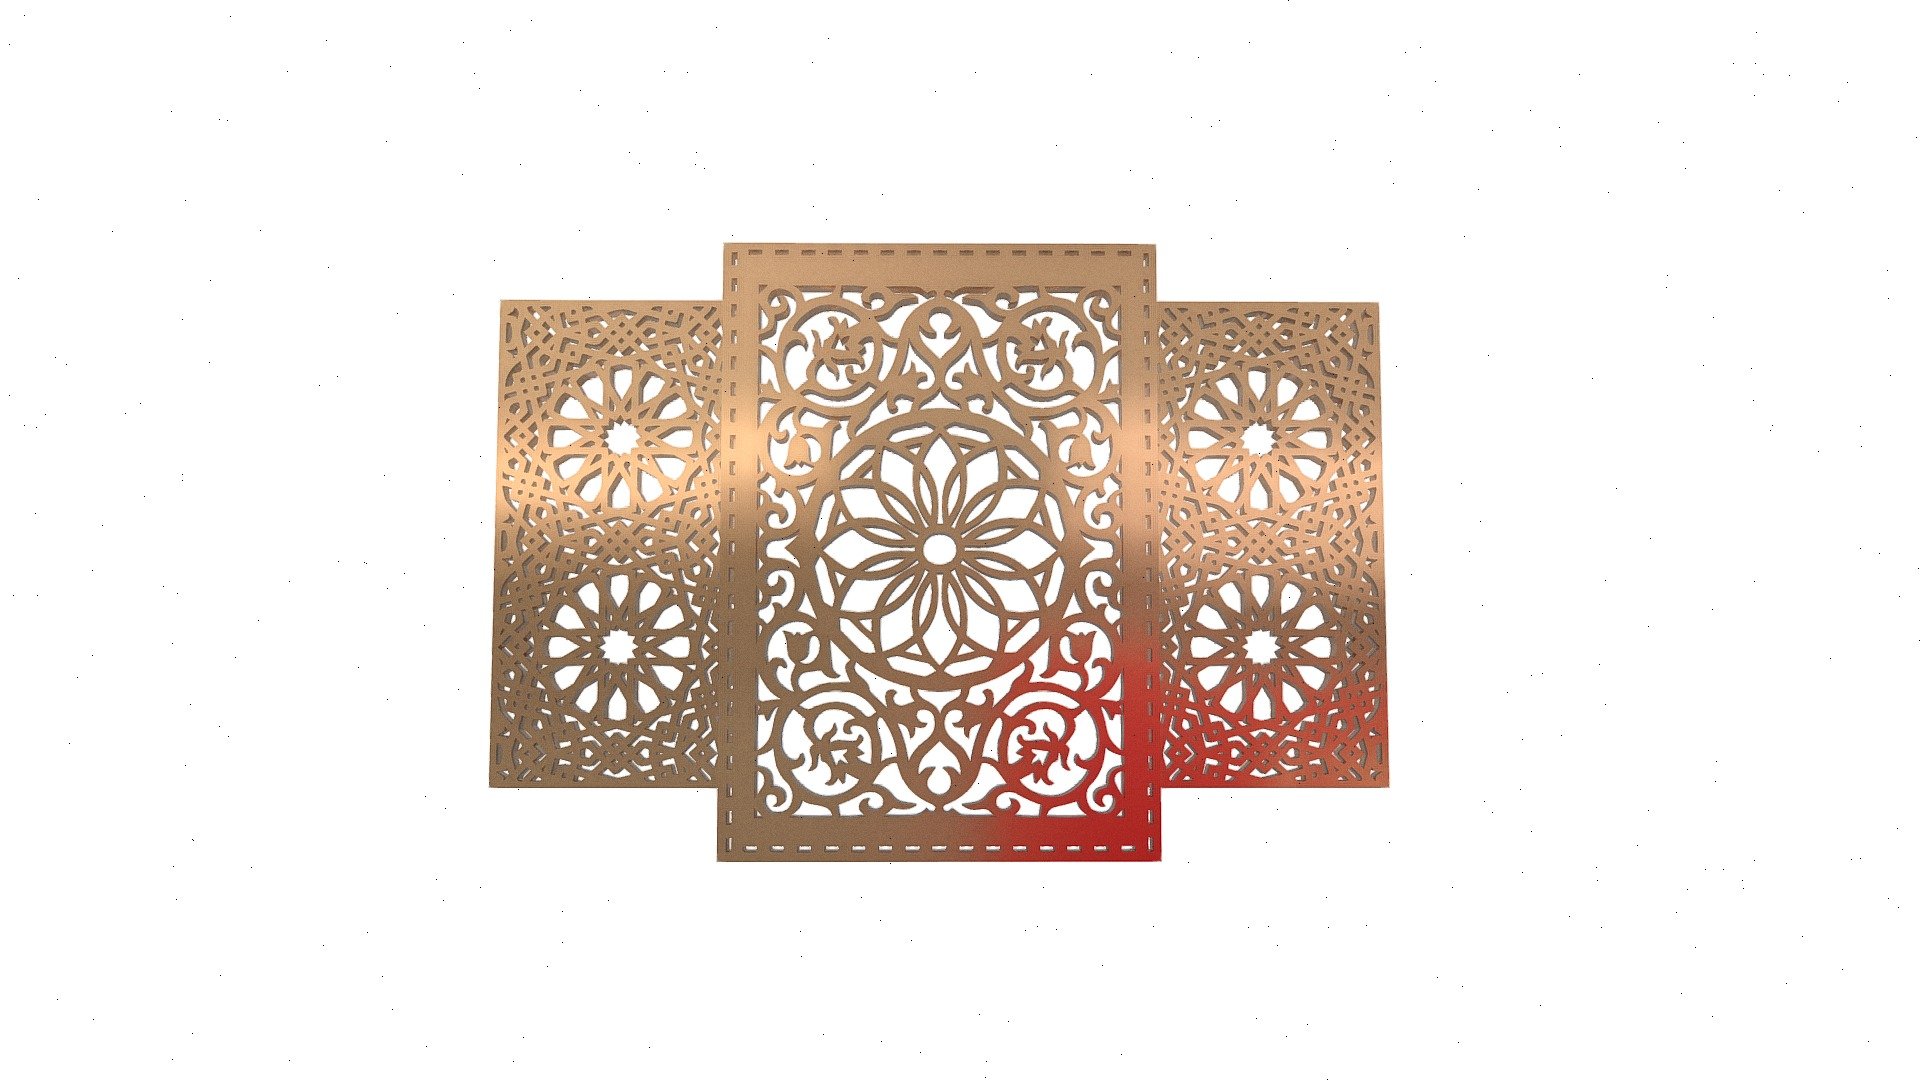 An Arabic decorative door is a beautifully designed door that features intricate and ornate details that are typical of Islamic art and design. These doors are often made from wood, metal, or a combination of both, and are adorned with a variety of geometric patterns, calligraphy, and floral motifs.

Stay connected with us and be the first to know about our latest updates, promotions, and news by following us on our social media channels. Don't miss out on exciting content and exclusive offers. Join us now and be part of our community.

Instagram1 :   www.instagram.com/medbunz

Instagram2 : www.instagram.com/wolfeey.design

Facebook : www.facebook.com/medboyanzar - Decorative Arabic Panels - Buy Royalty Free 3D model by medbunz 3d model